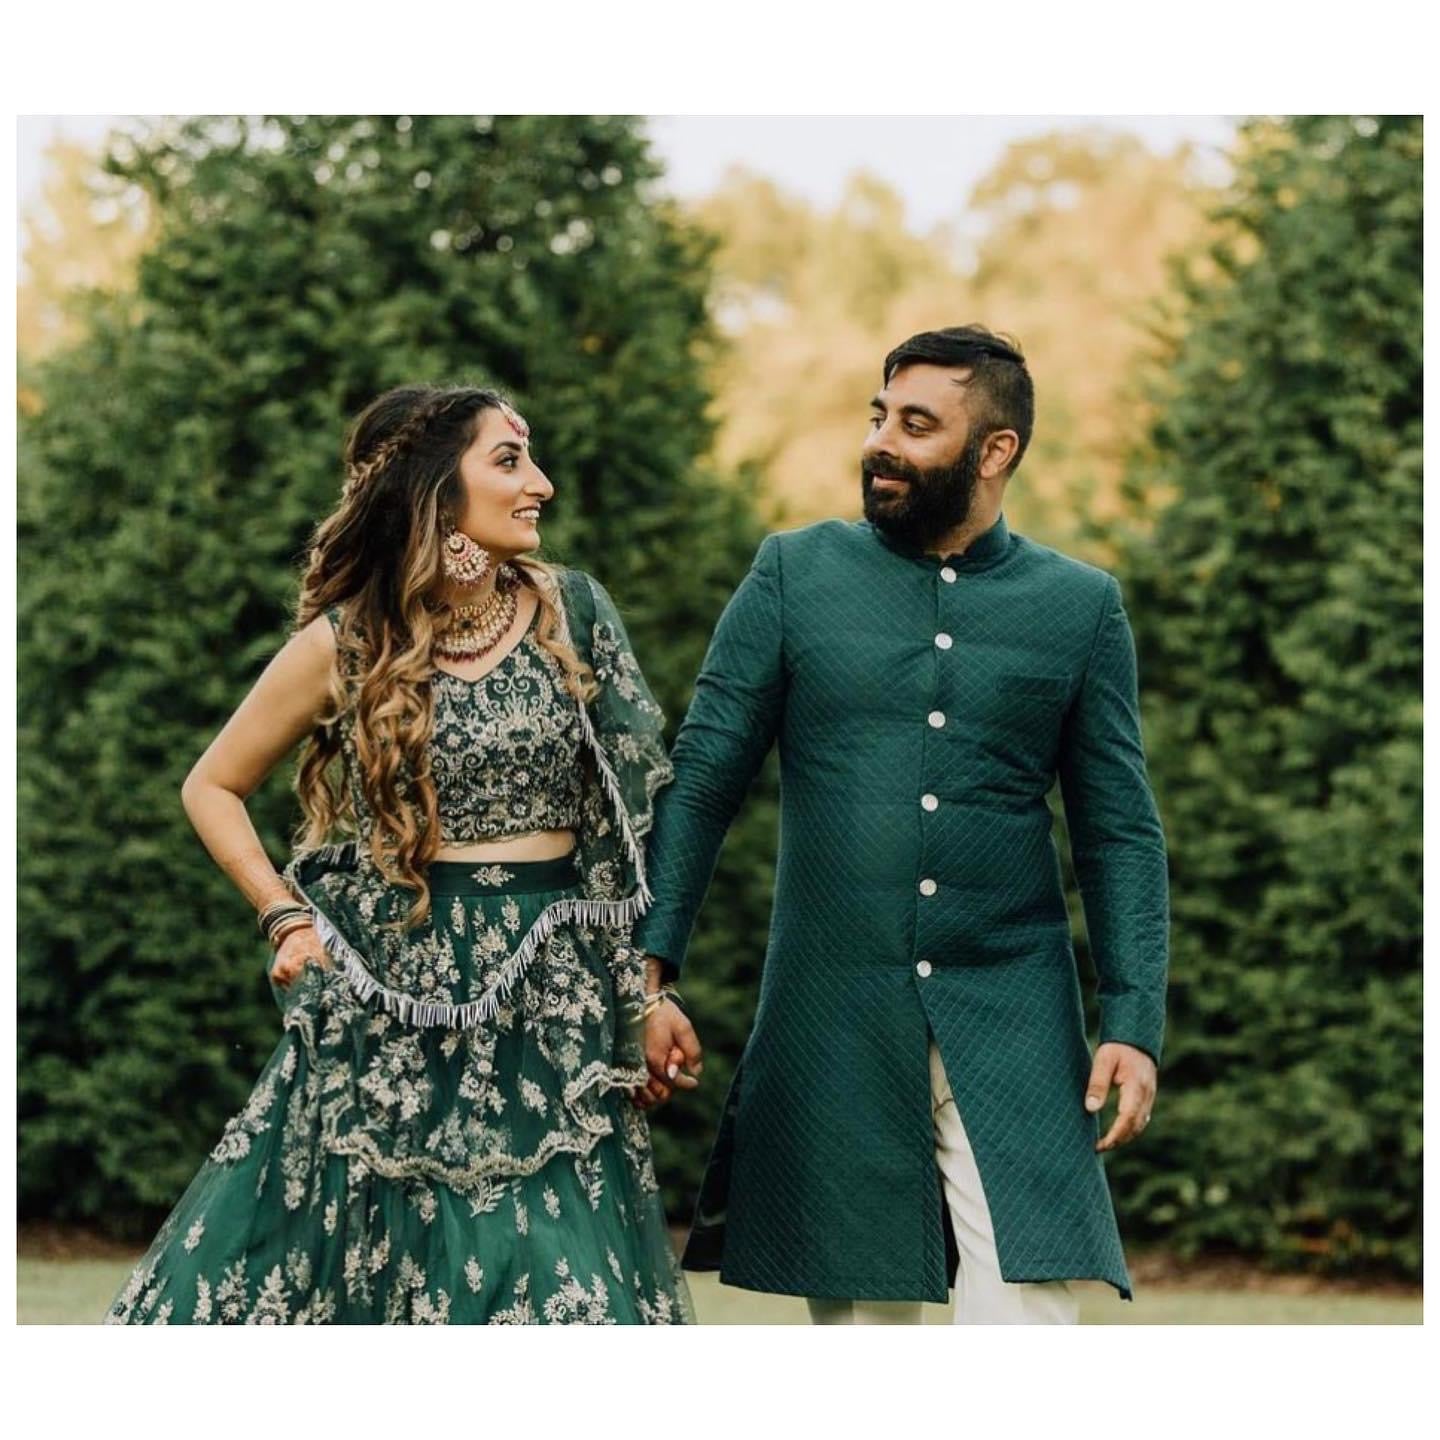 Parvathy Chankramath - This PC BRIDE picked a mint green lehenga and blush  pink crop top for a touch of glam! Lehenga skirt is embellished with  zardozi, cut dana and buttis pattern